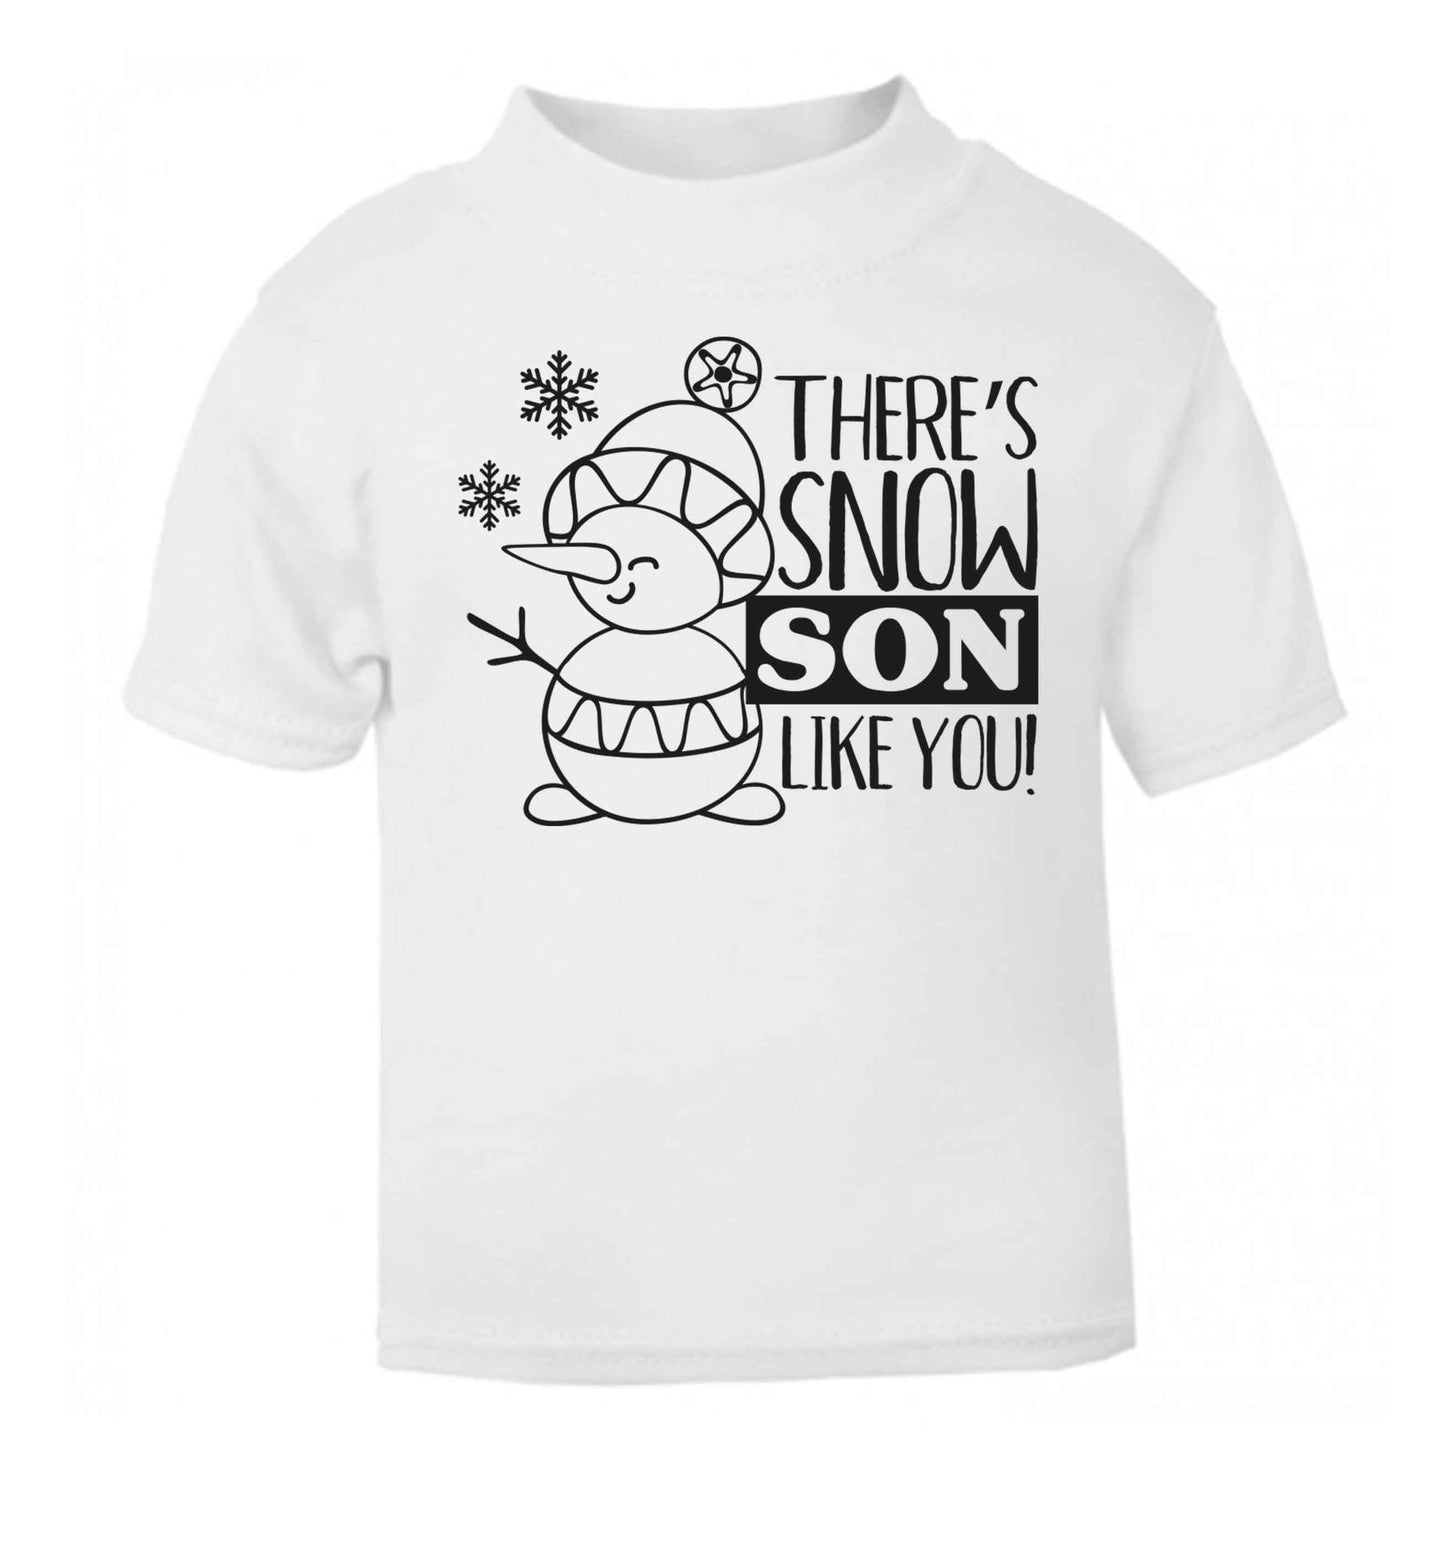 There's snow son like you white baby toddler Tshirt 2 Years